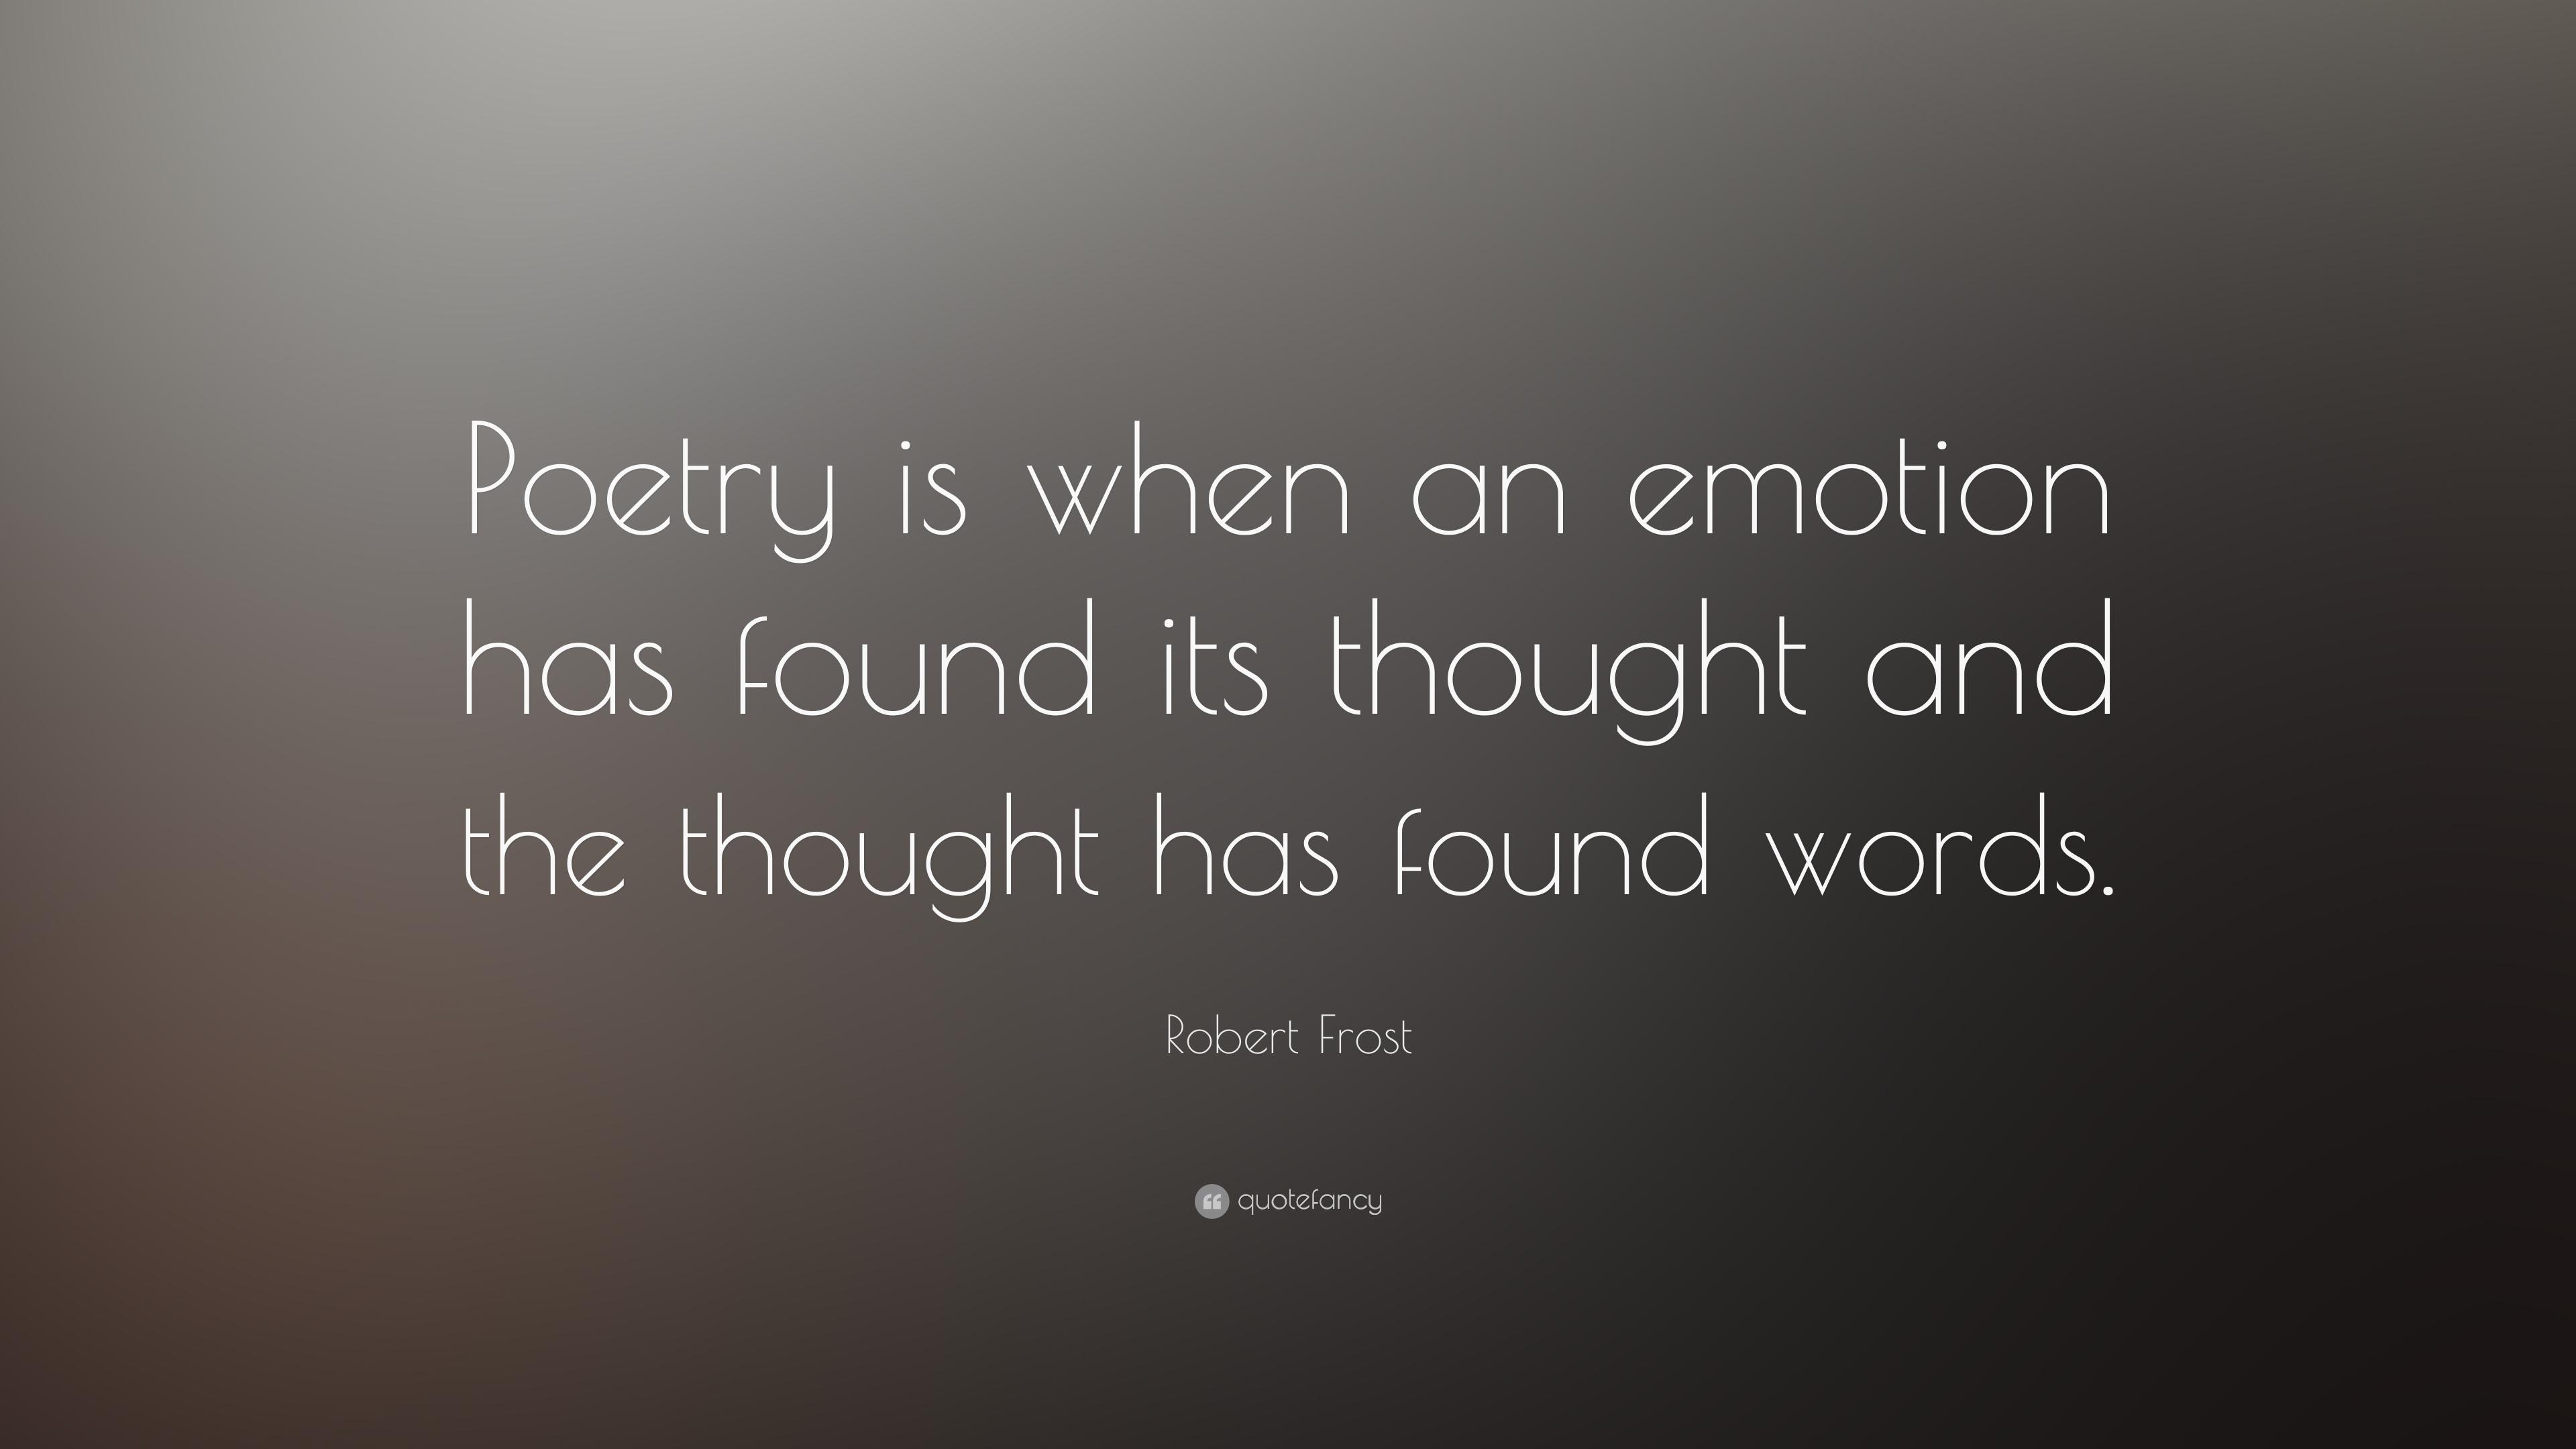 Robert Frost Quote: “Poetry is when an emotion has found its thought